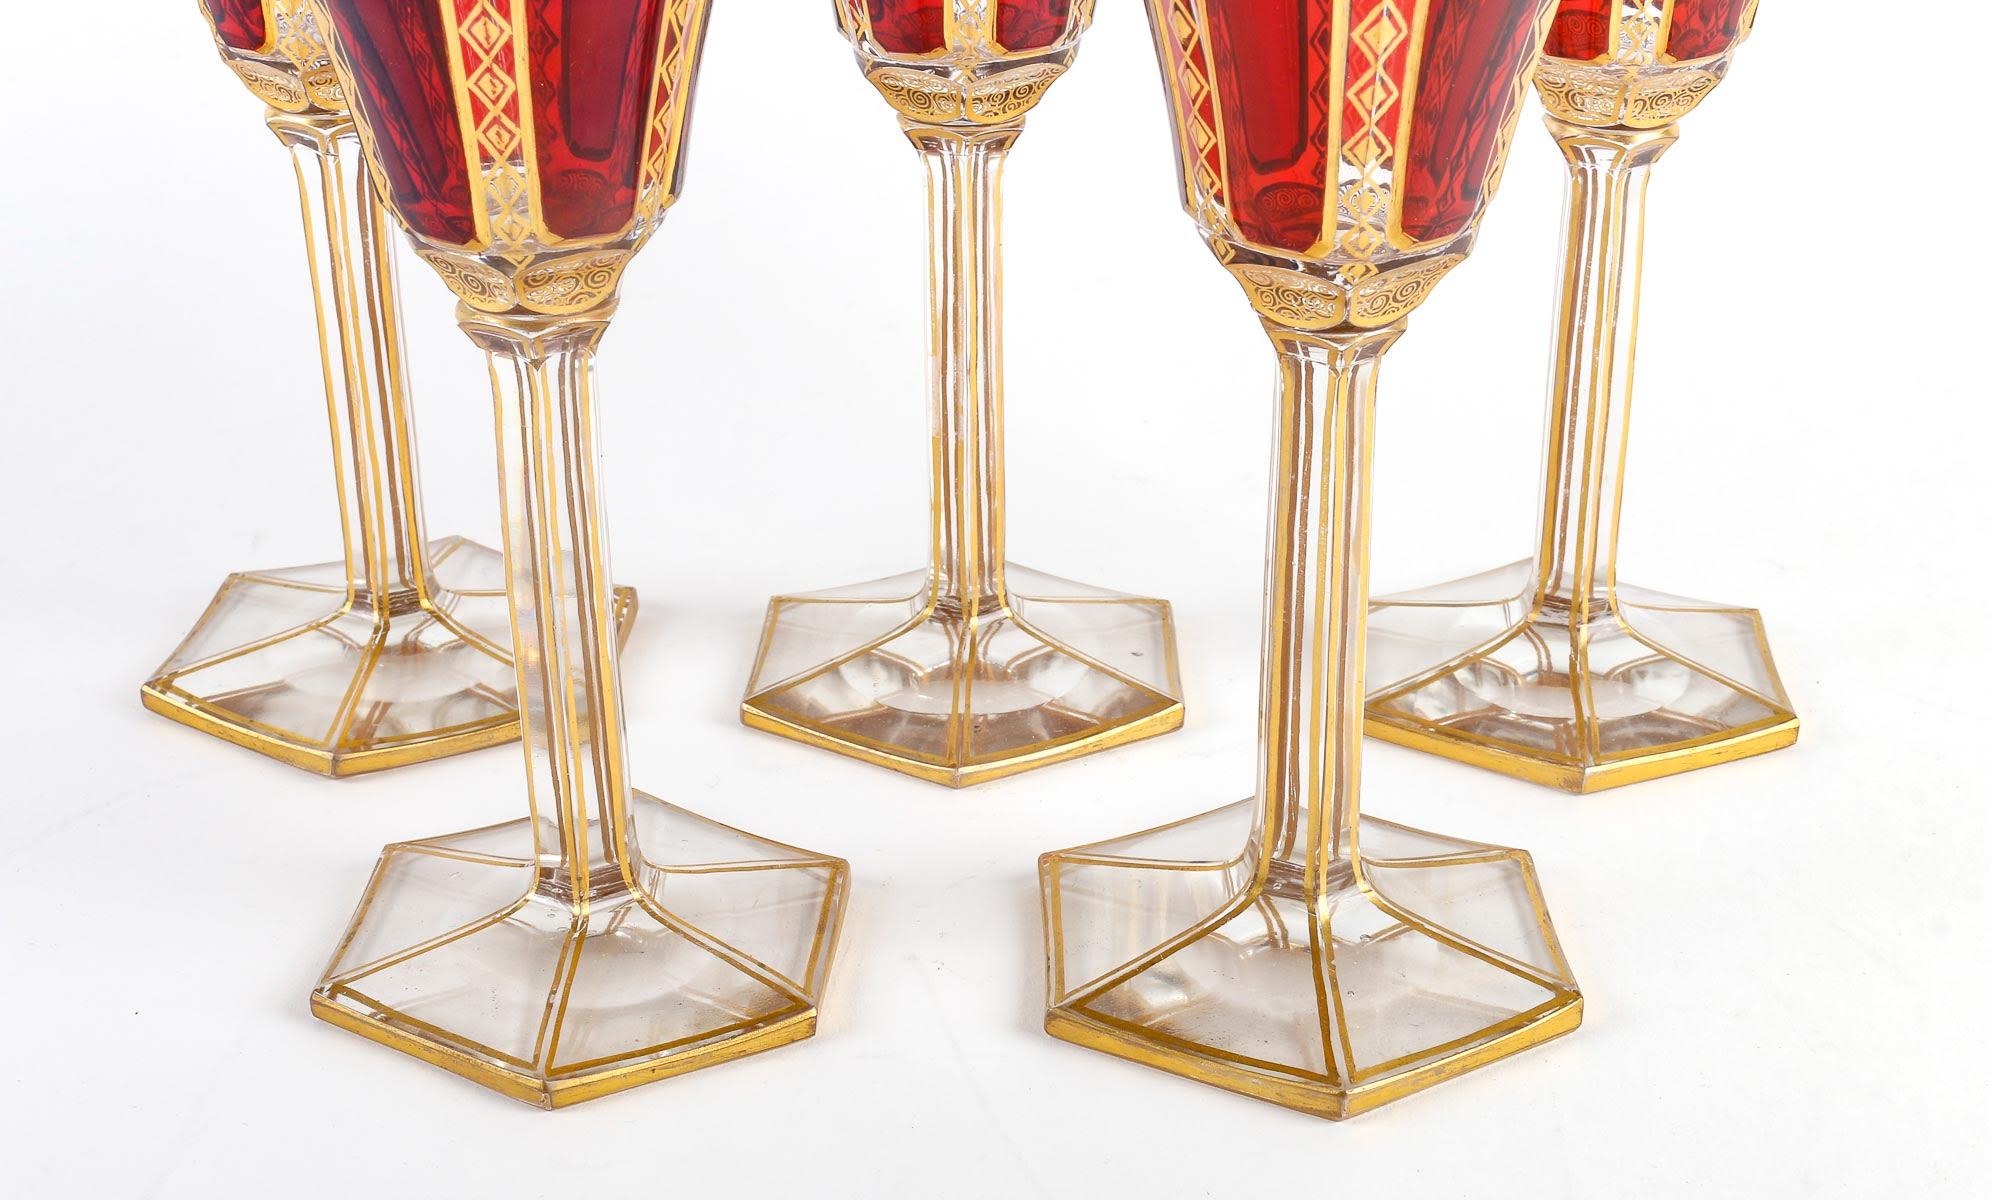 5 Bohemian Crystal Glasses, 19th Century. For Sale 3